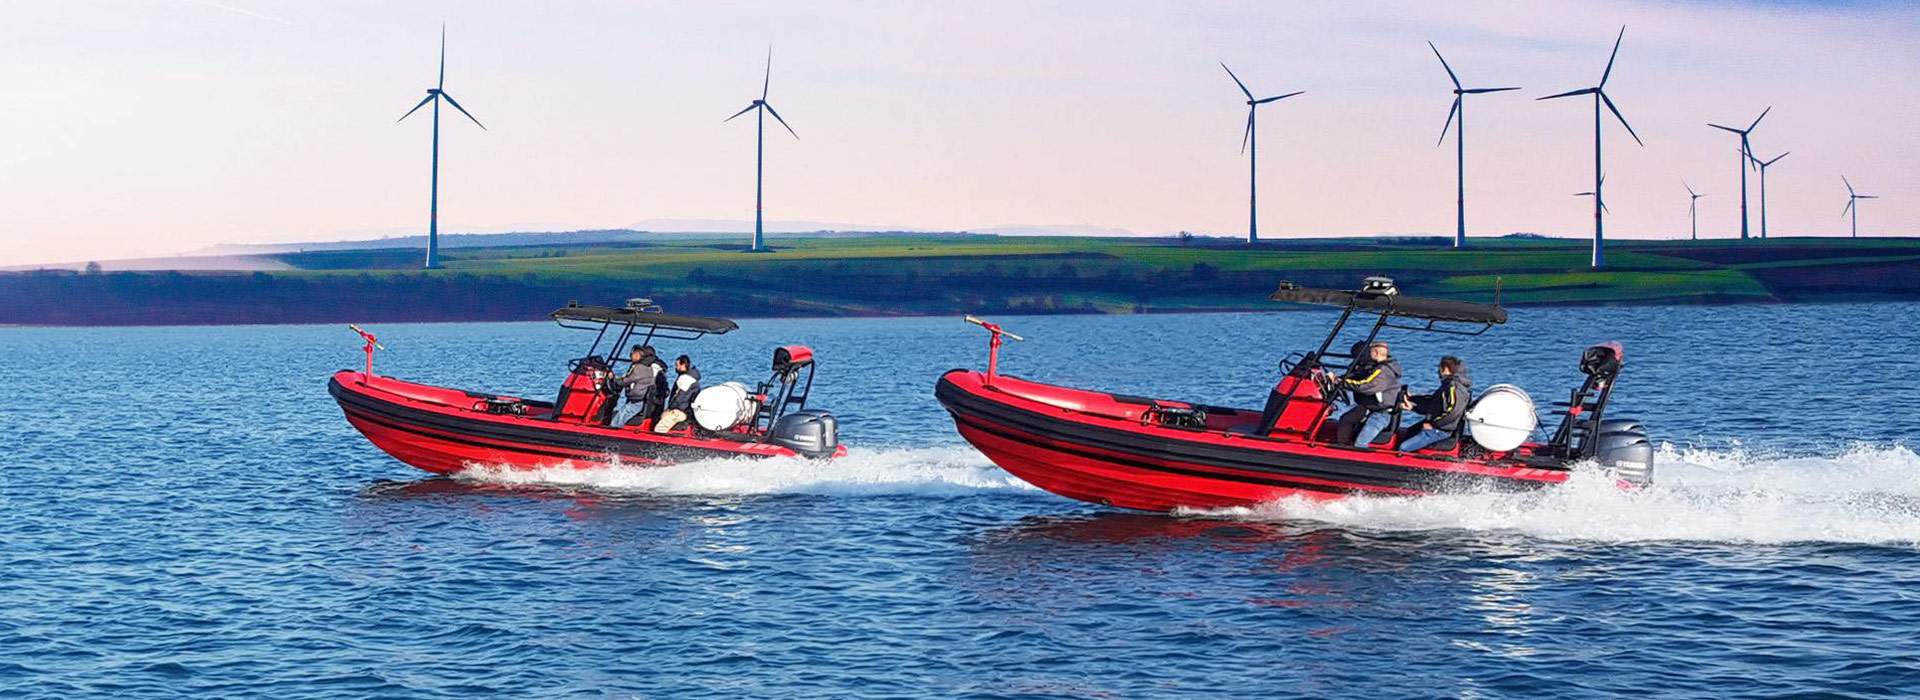 Ocean Craft Marine Delivers New Fire- Fighting RHIBS and Training to the MACL Airport Rescue and Fire Service